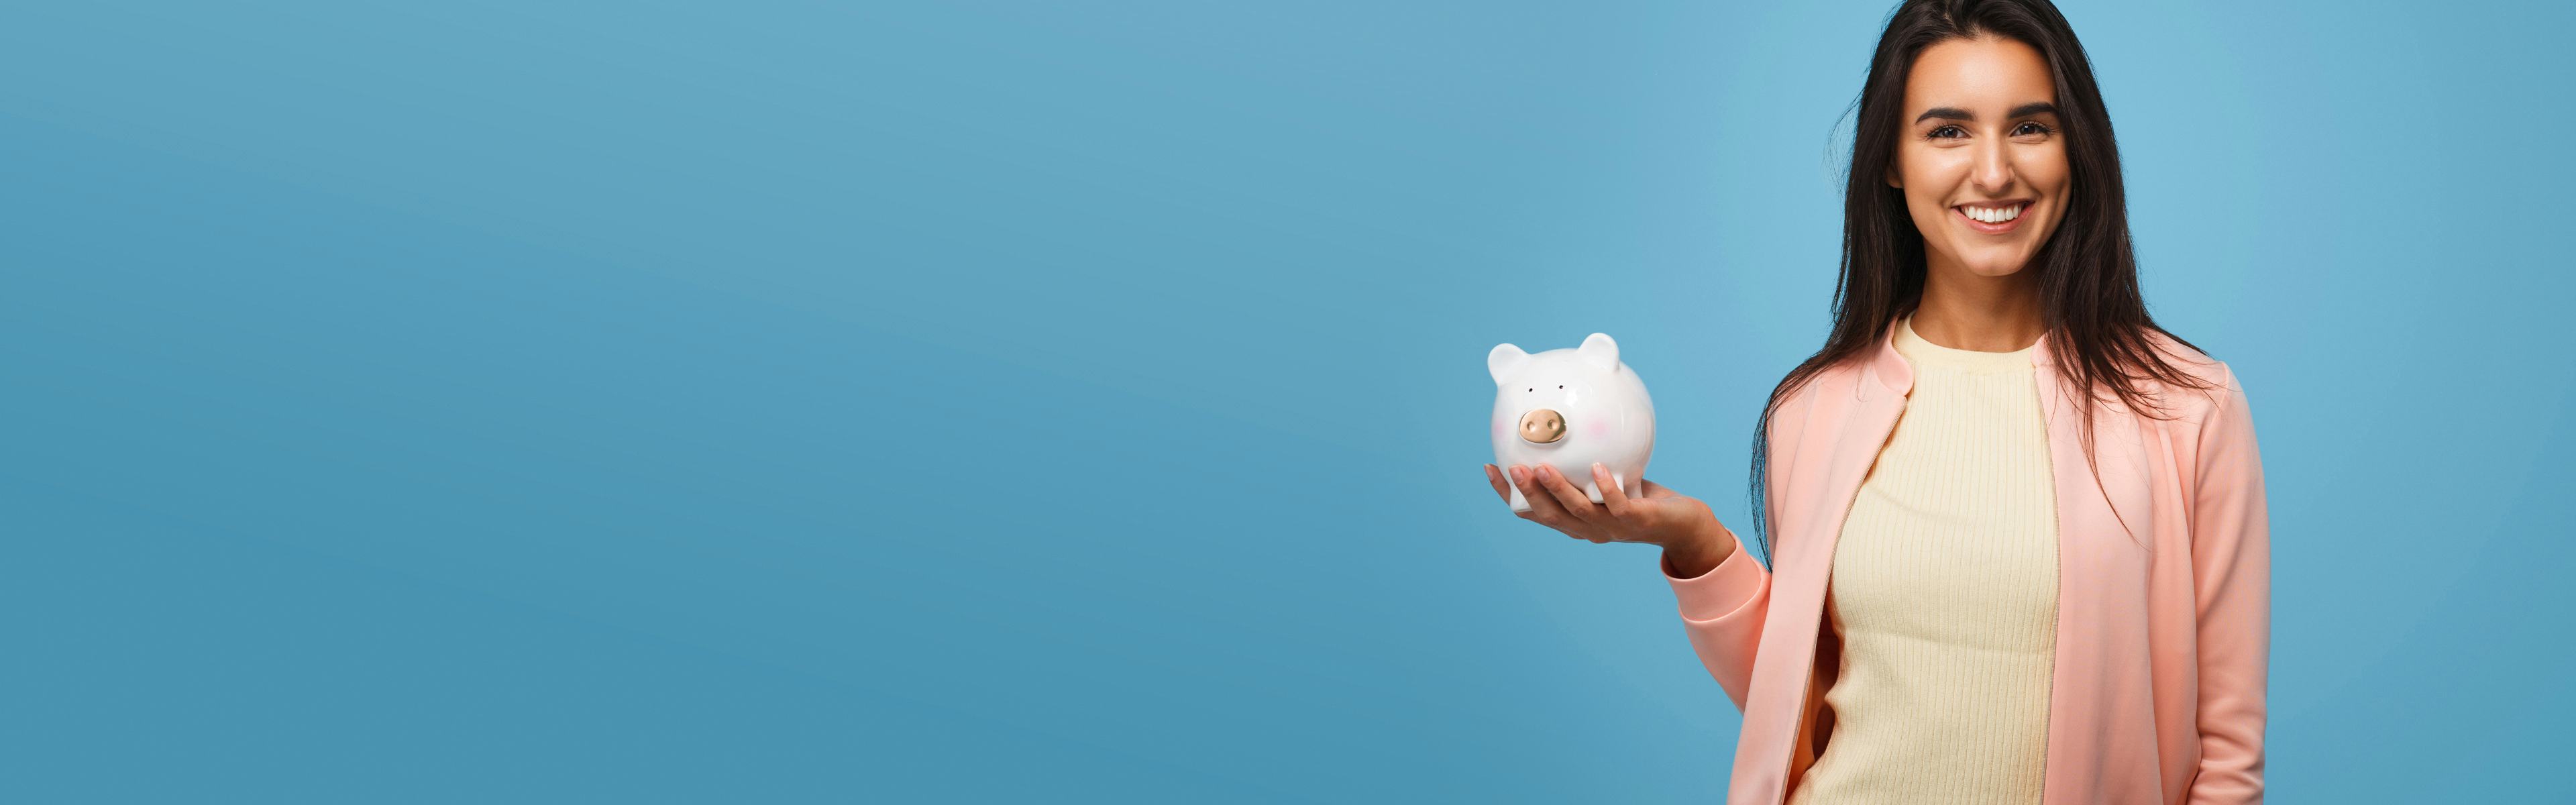 Image of woman holding a piggy bank